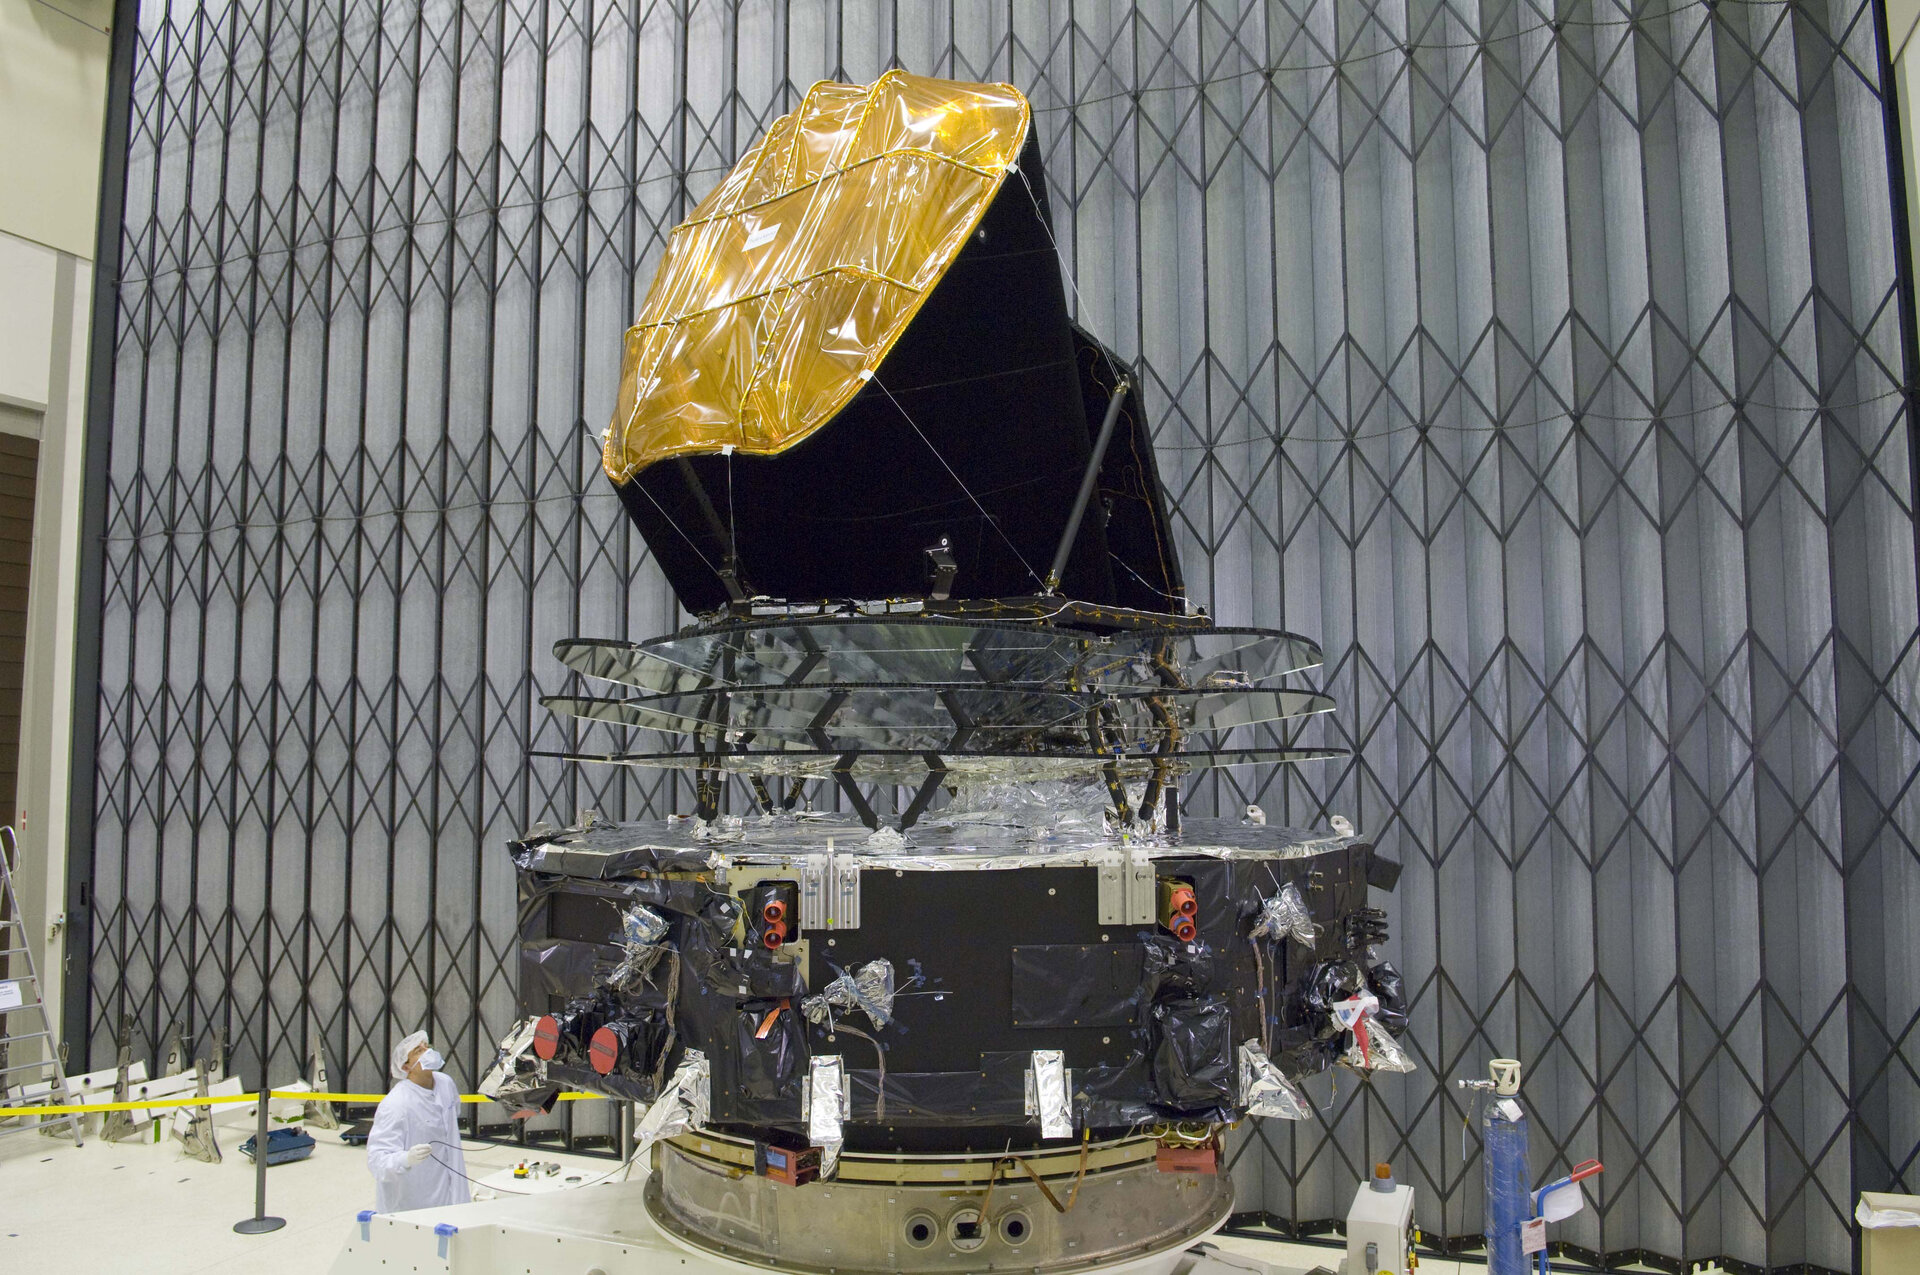 Planck being prepared for tests